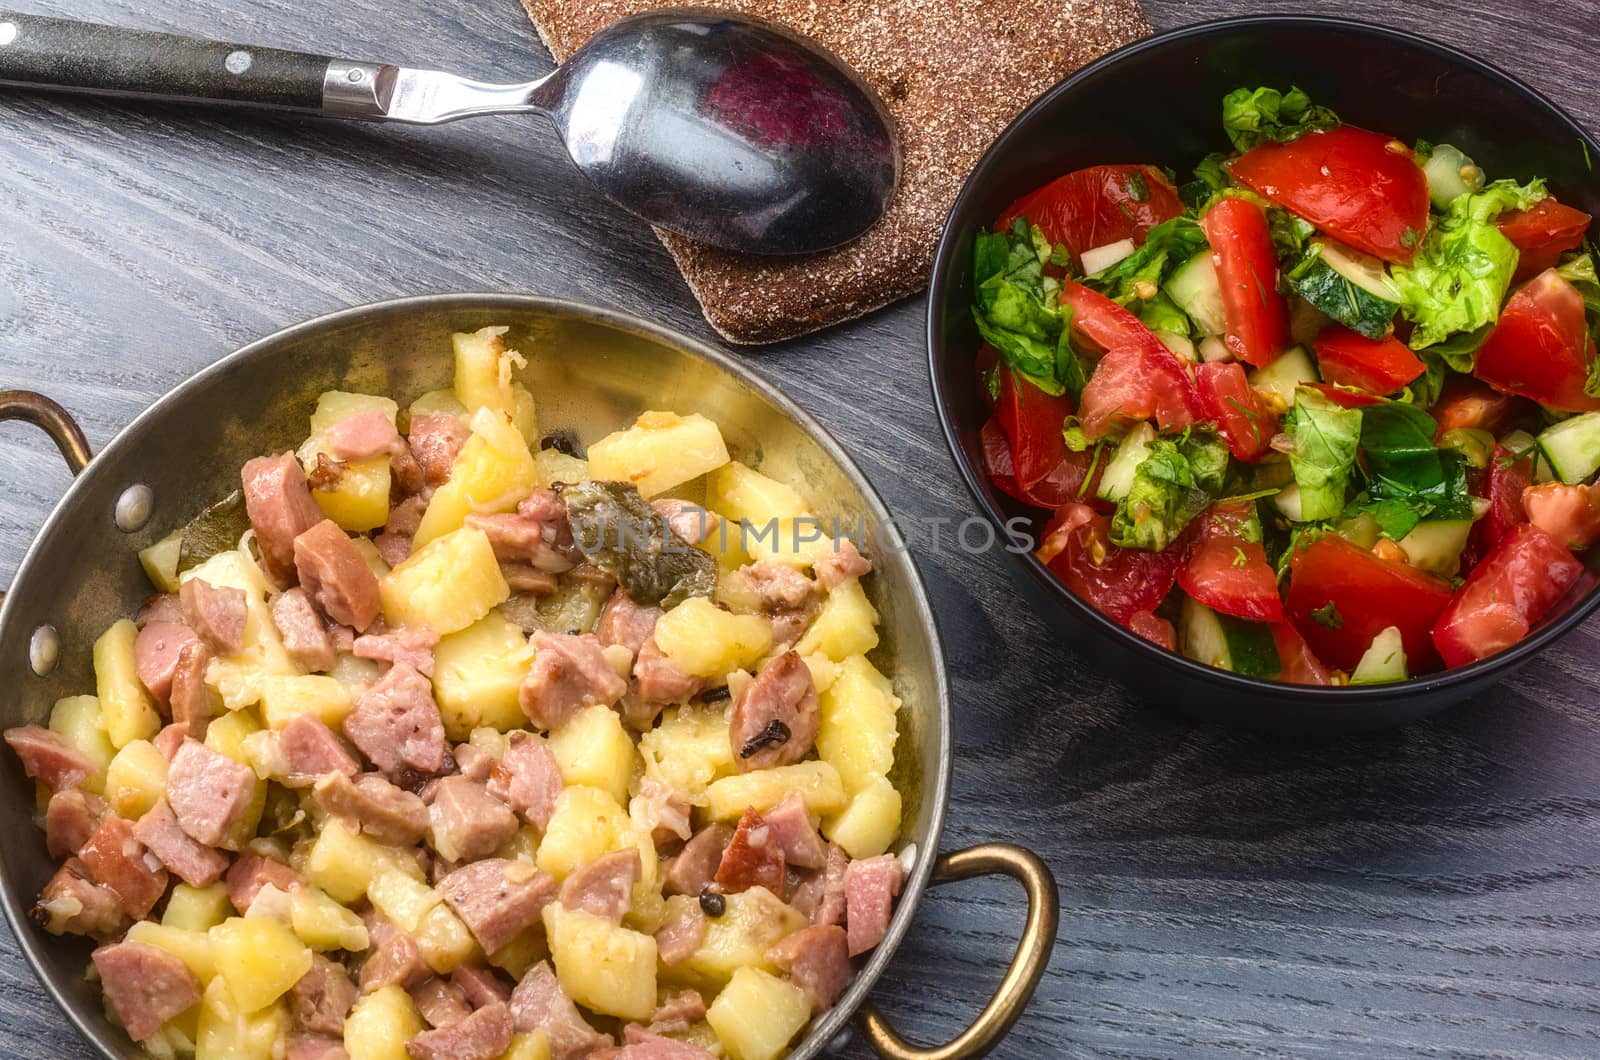 Fried potato with meat by maisicon